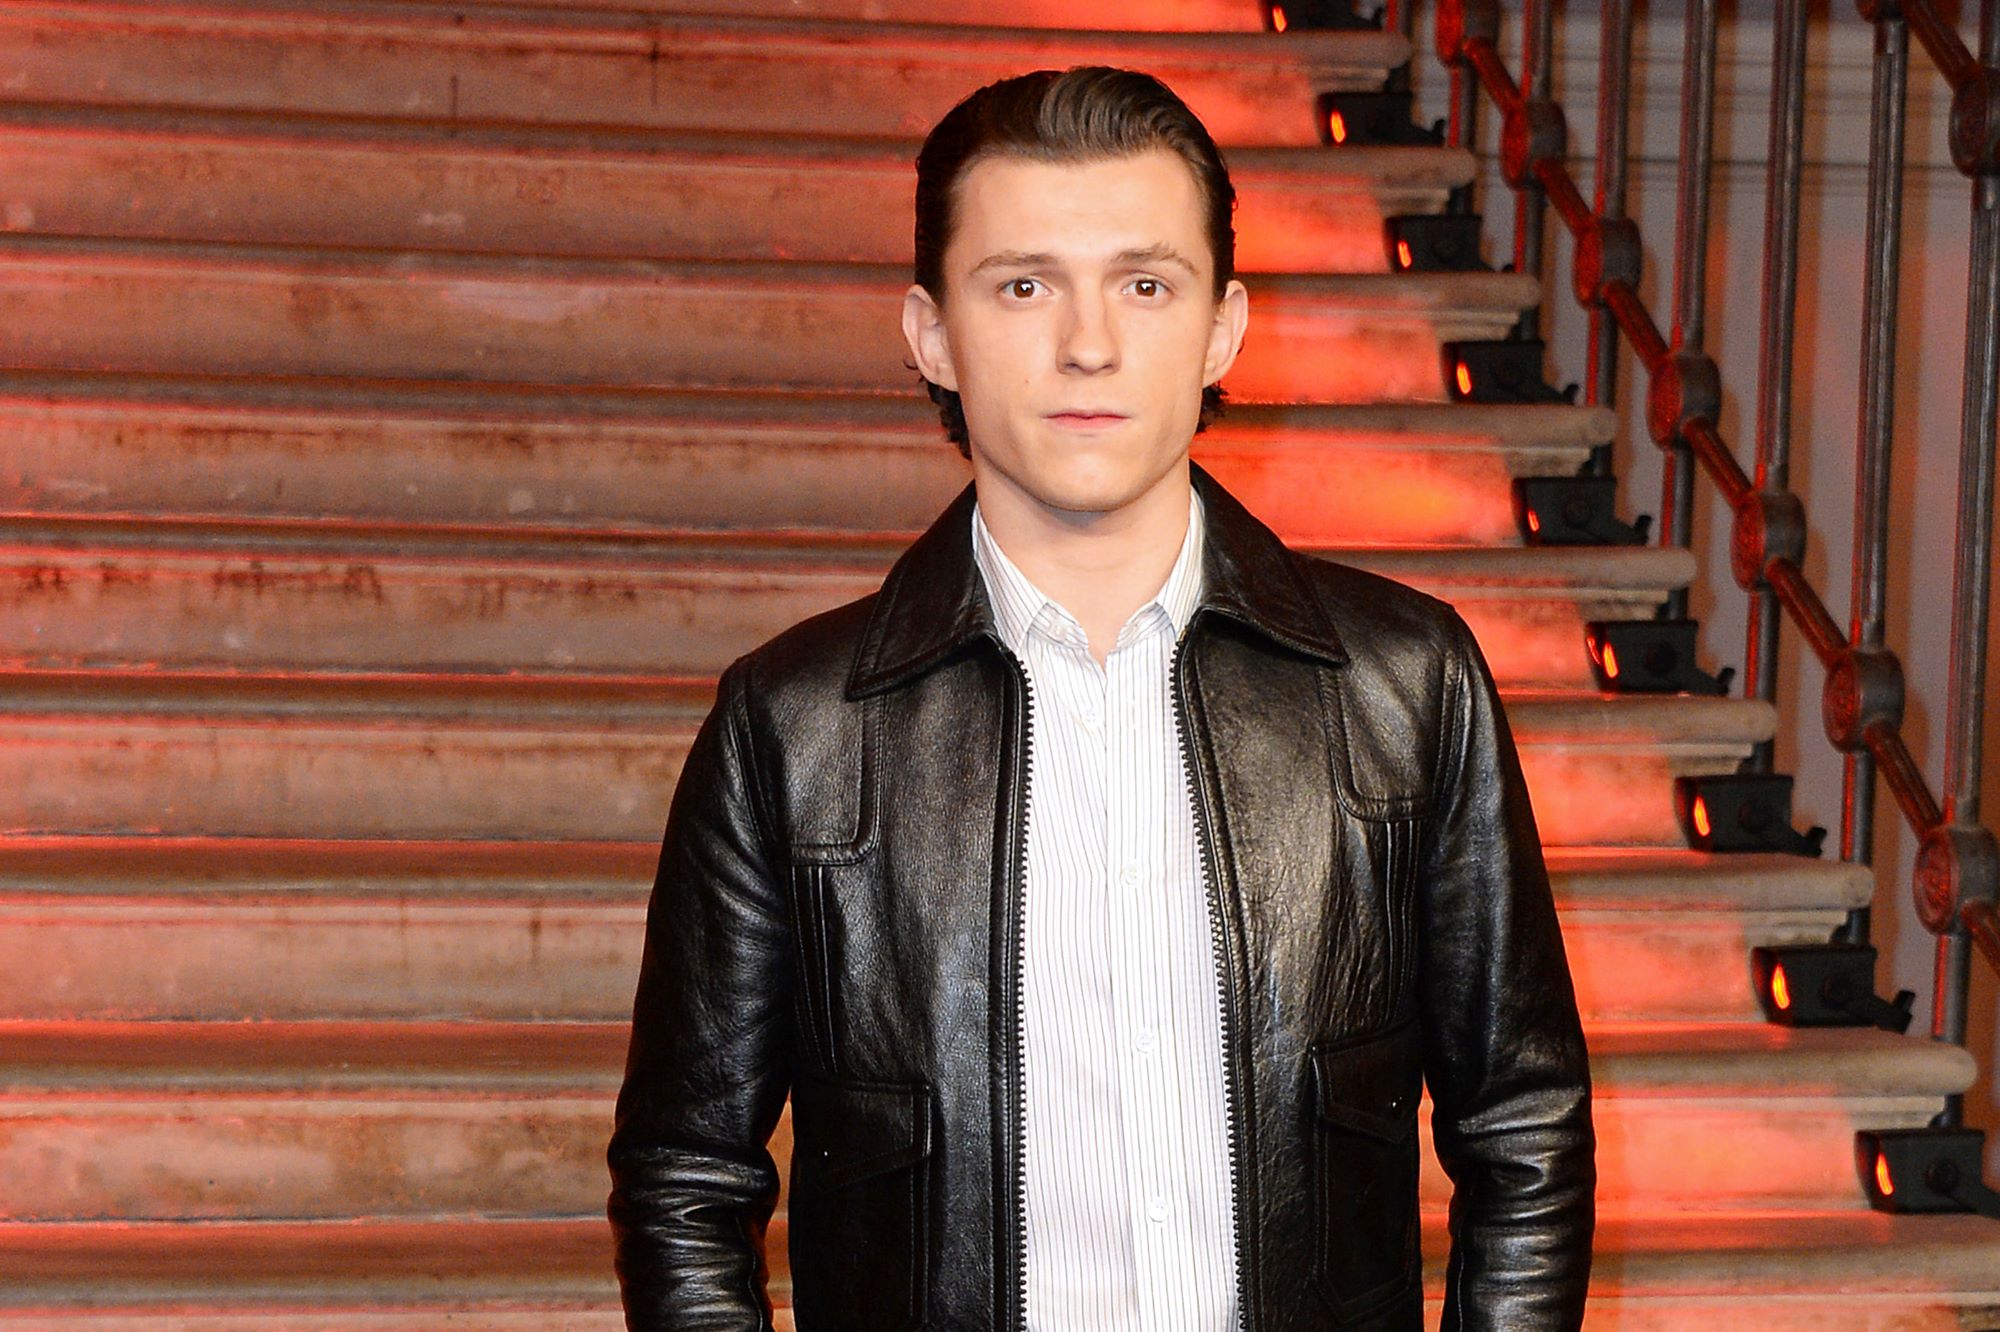 'Spider-Man: No Way Home' star Tom Holland wears a black leather jacket over a white striped button-up shirt.